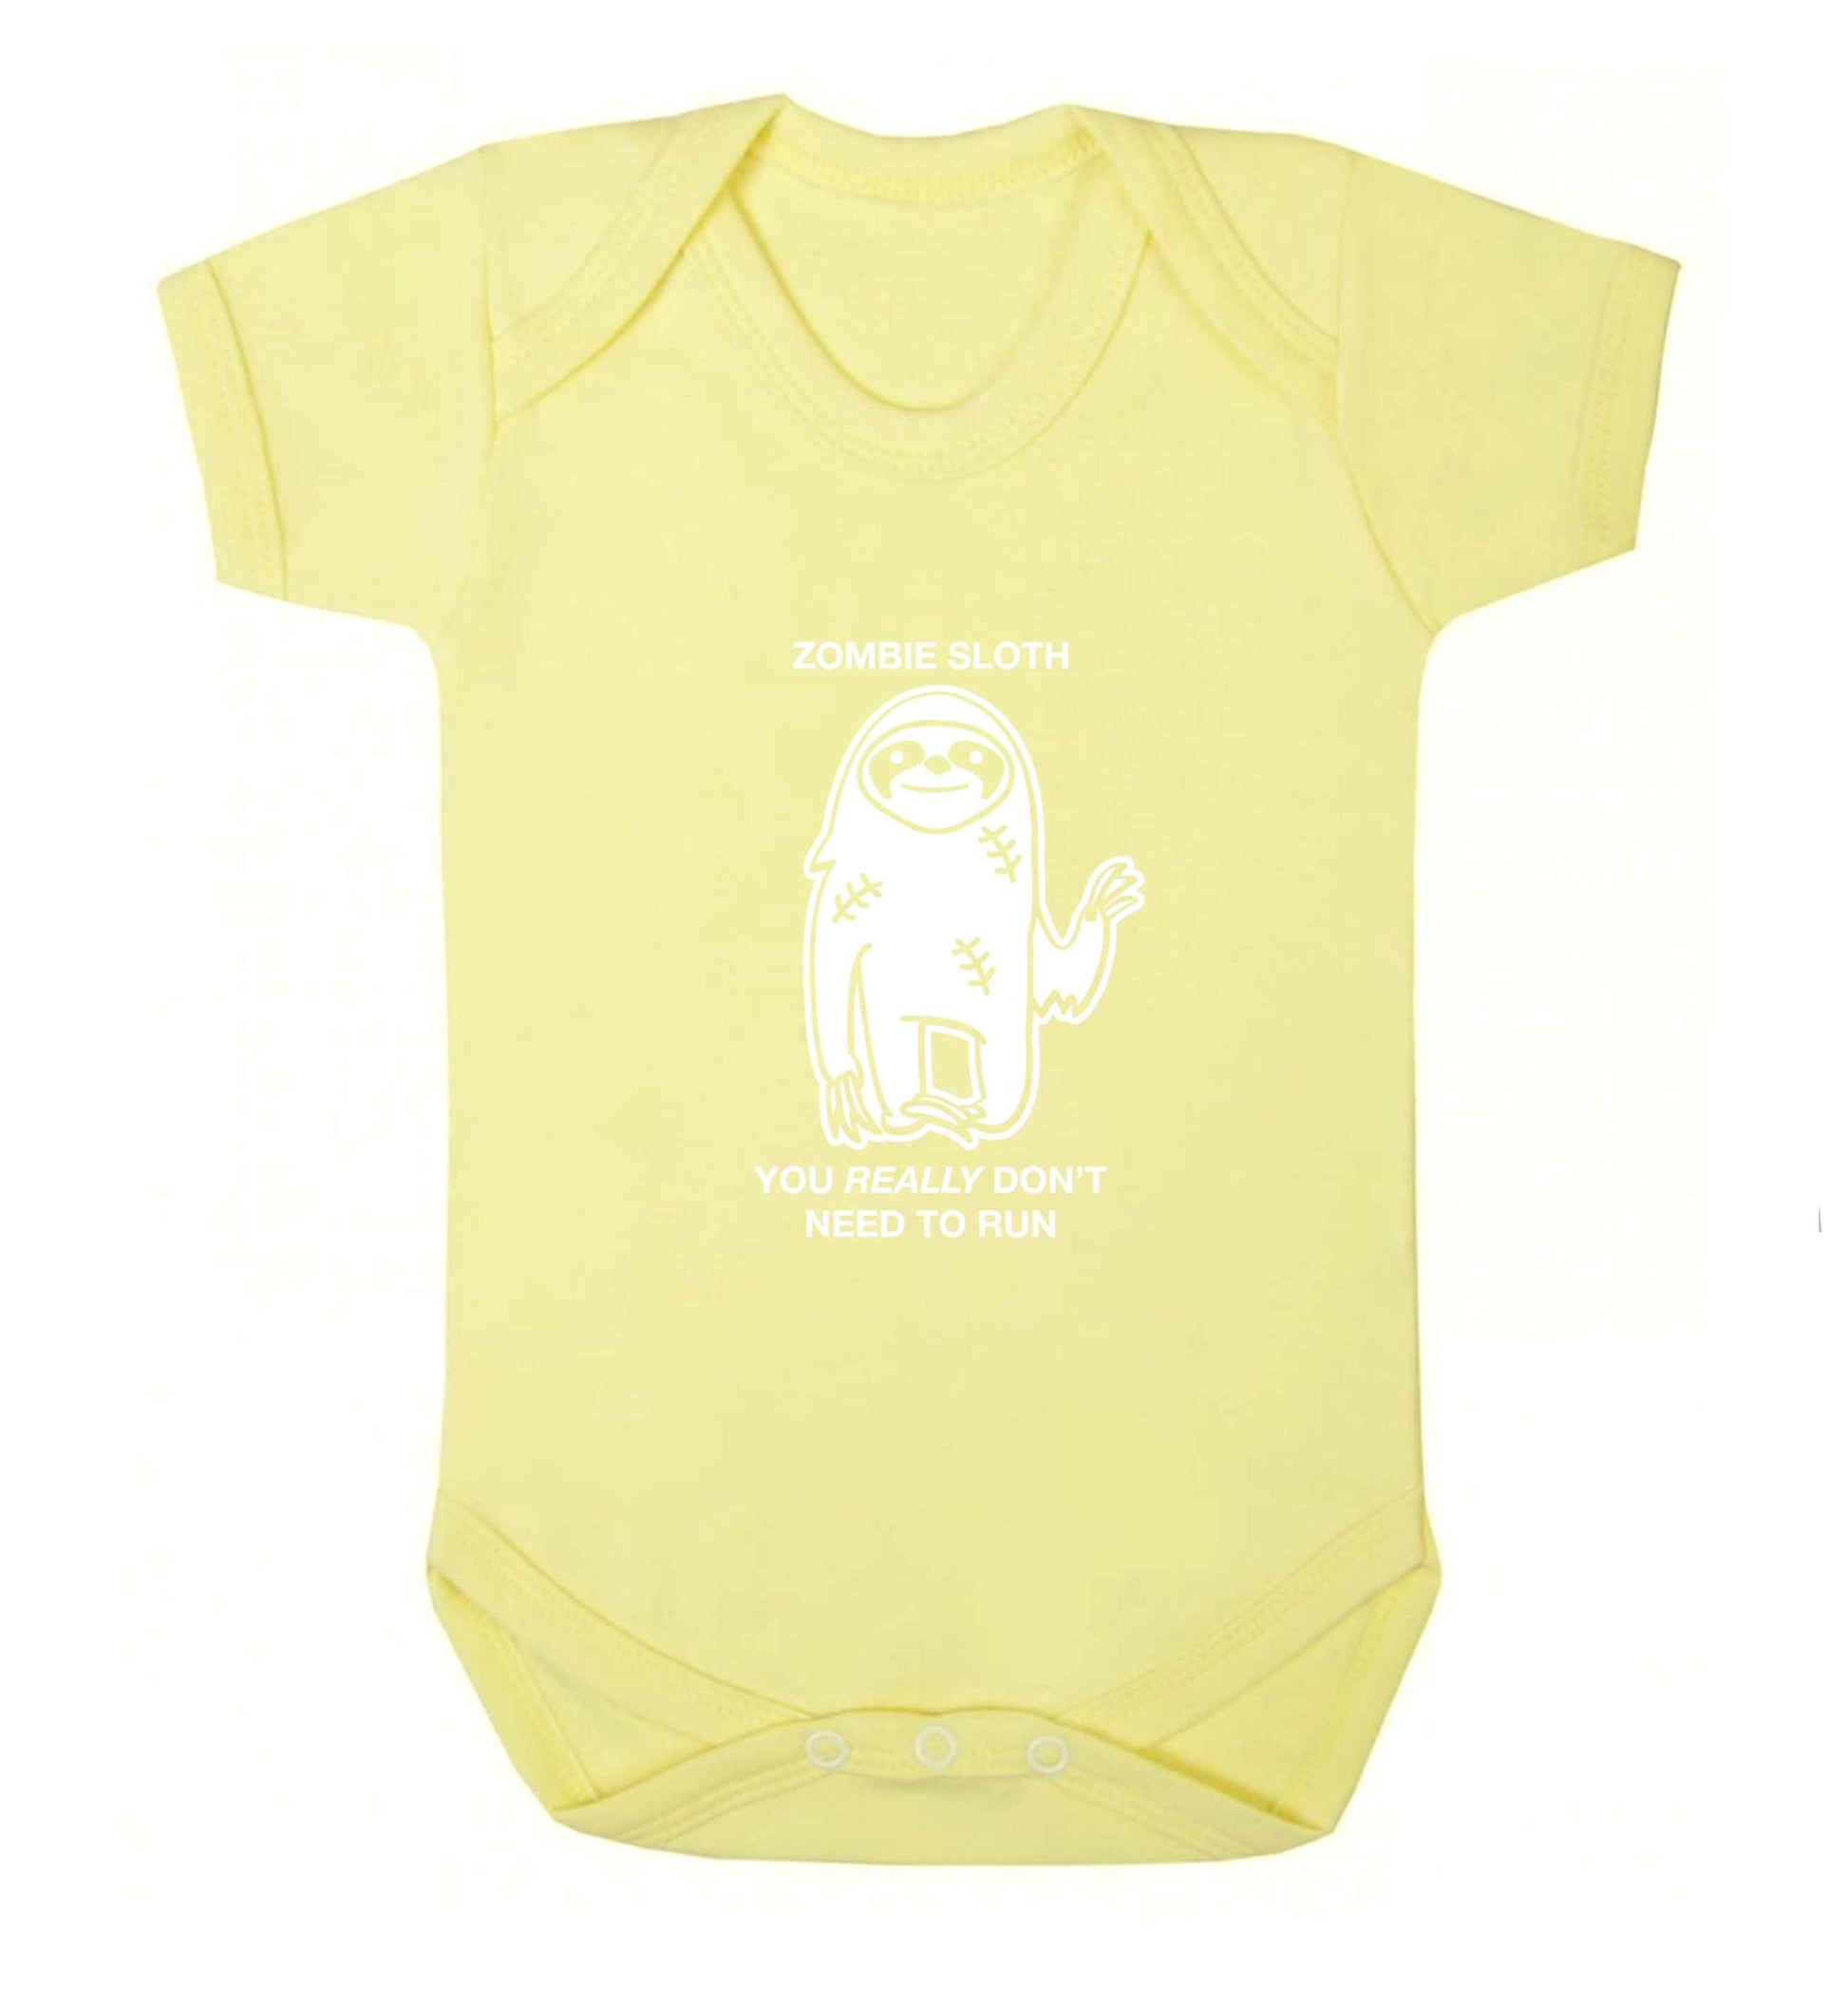 Zombie sloth you really don't need to run baby vest pale yellow 18-24 months